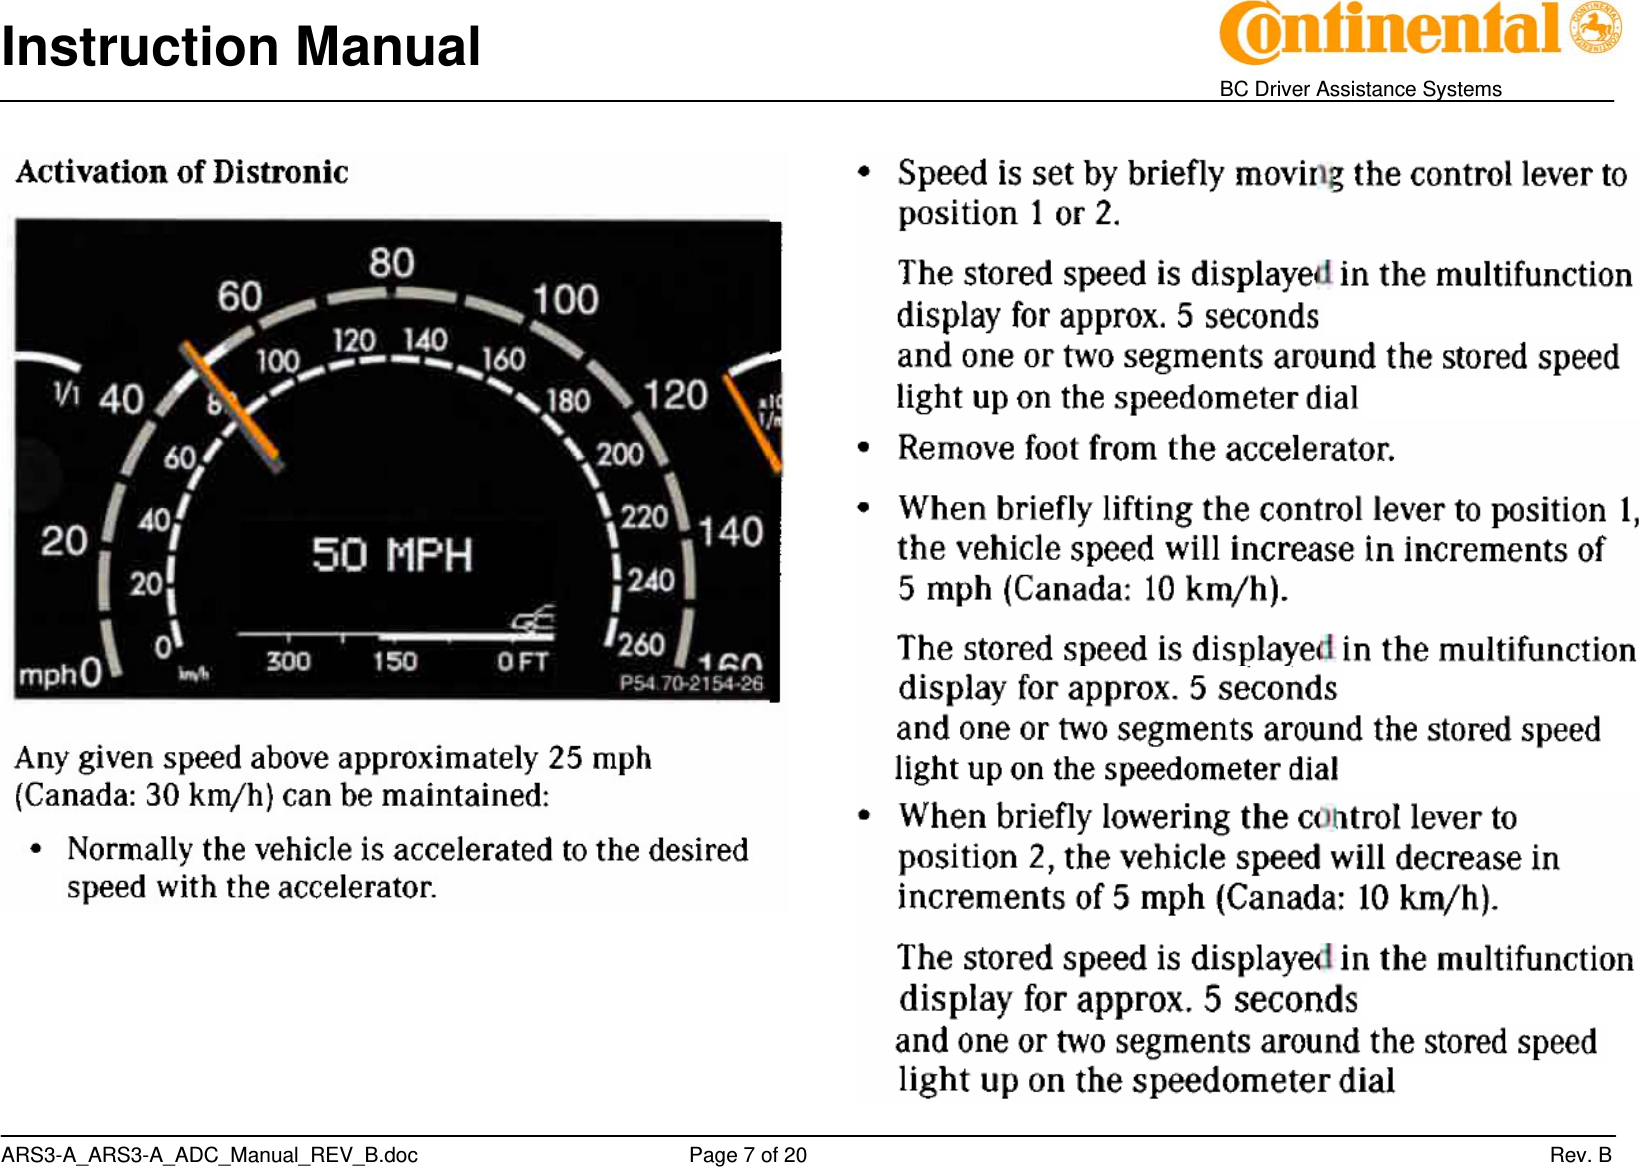 Instruction Manual    BC Driver Assistance Systems ARS3-A_ARS3-A_ADC_Manual_REV_B.doc     Page 7 of 20                 Rev. B              